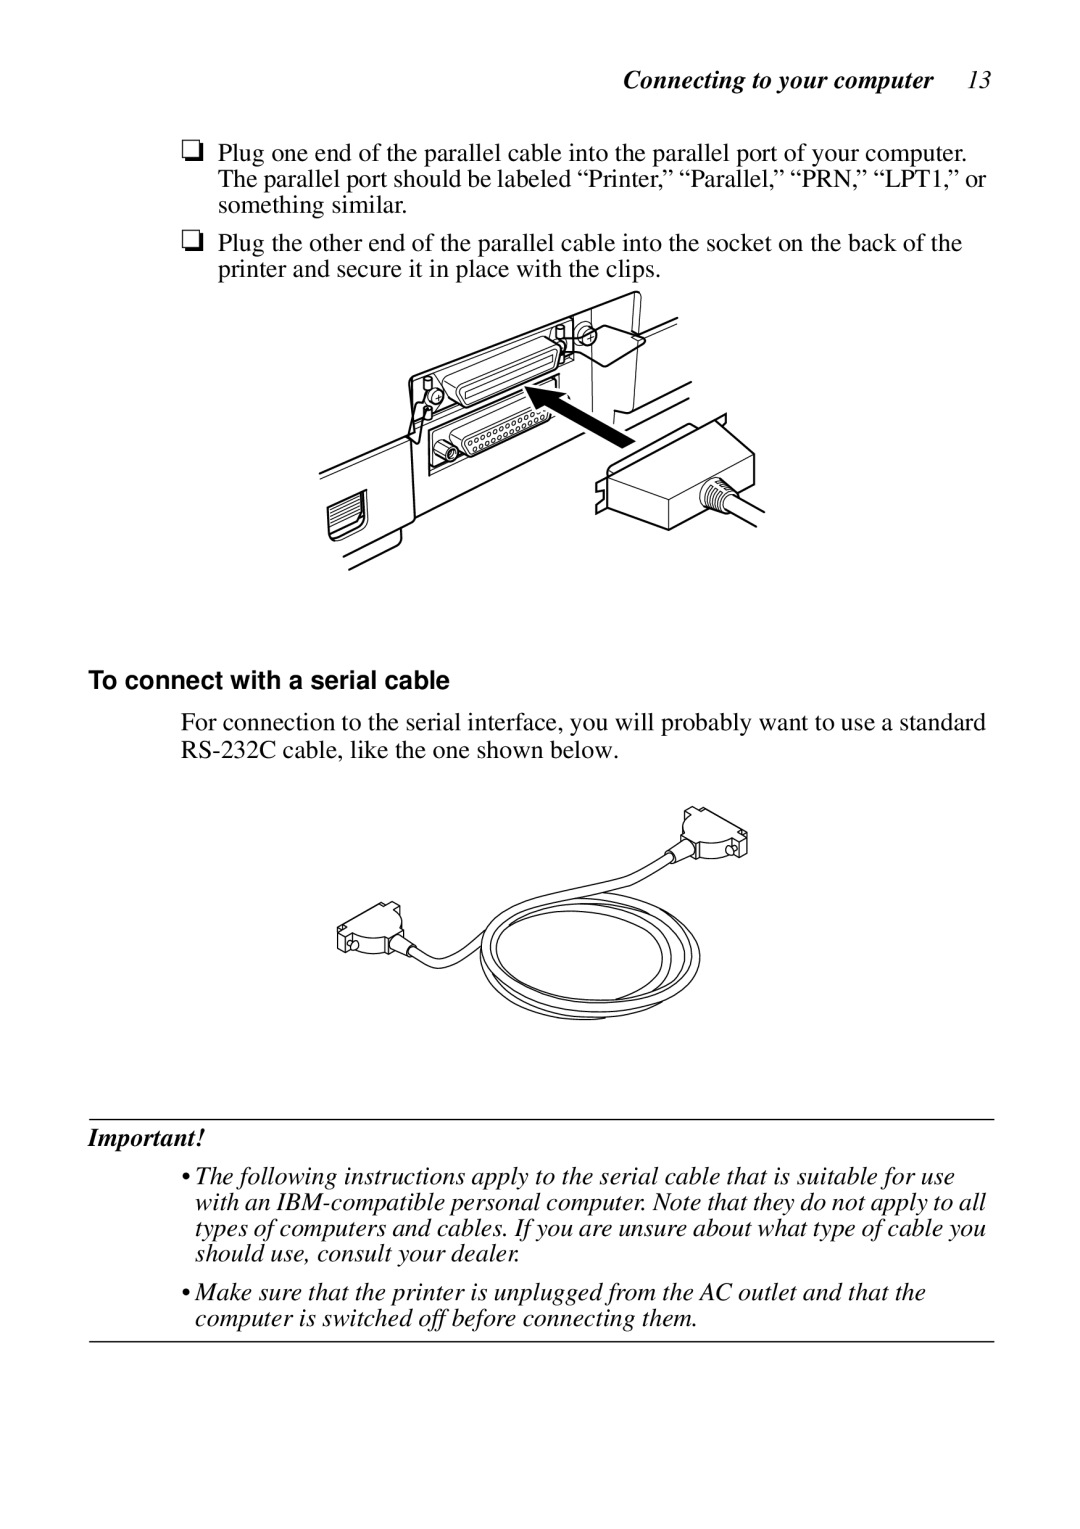 Star Micronics LC-8021 manual To connect with a serial cable, Connecting to your computer 